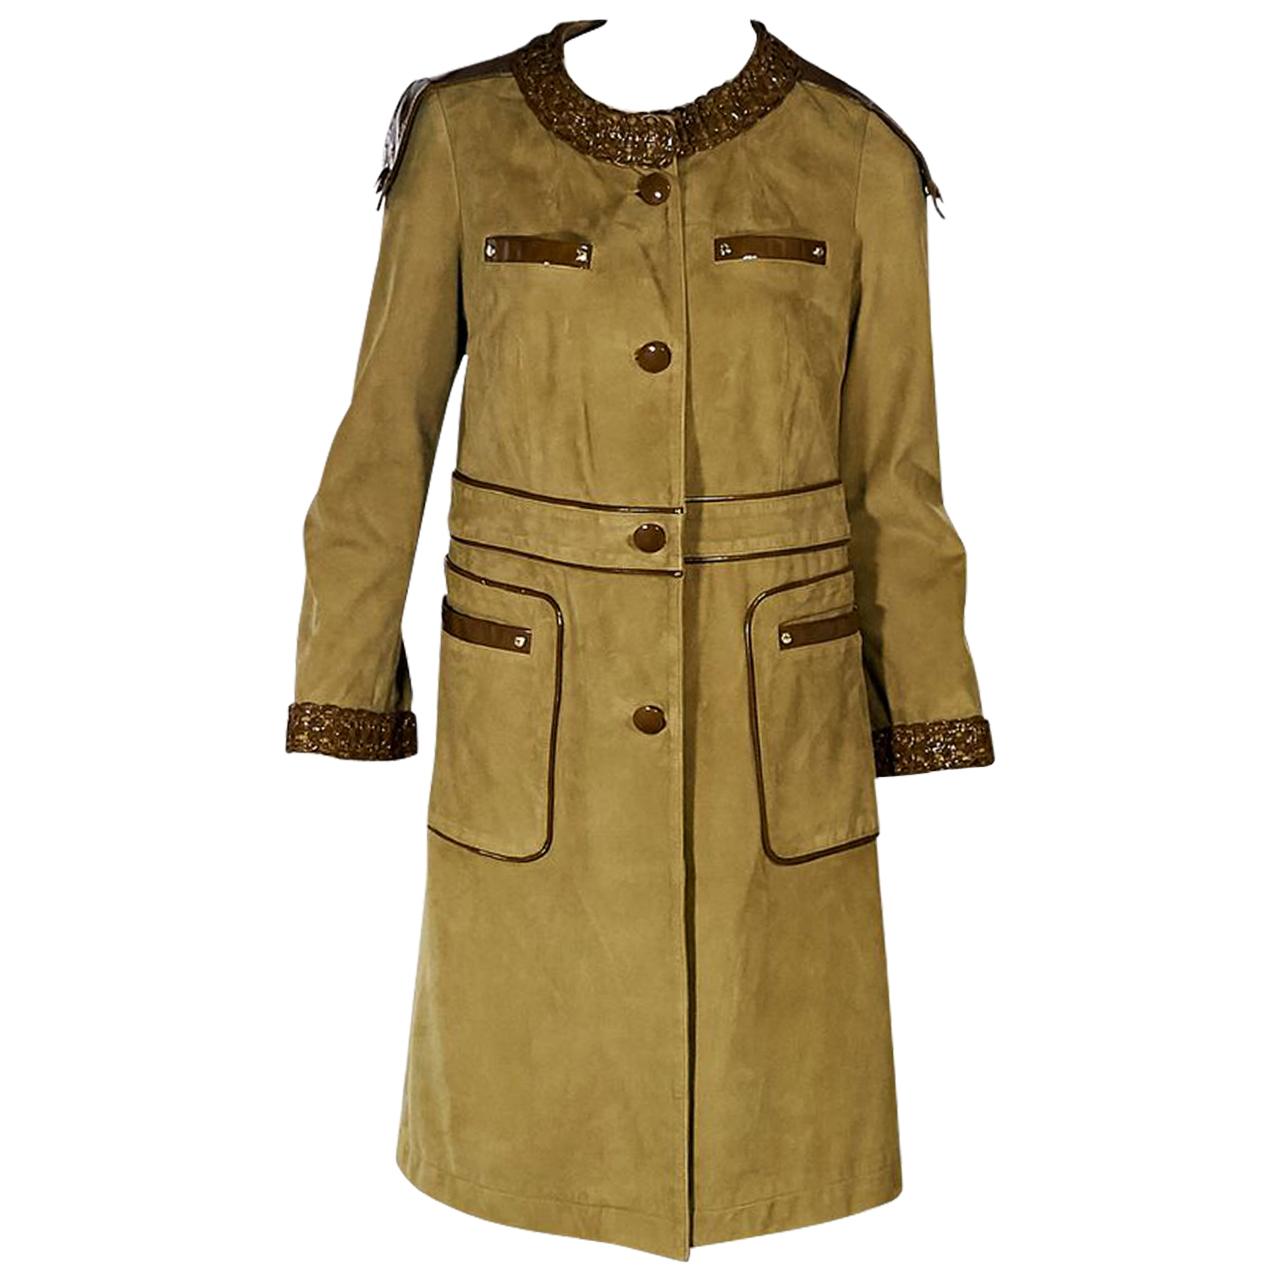 Tan Etro Patent Leather-Trimmed Suede Coat